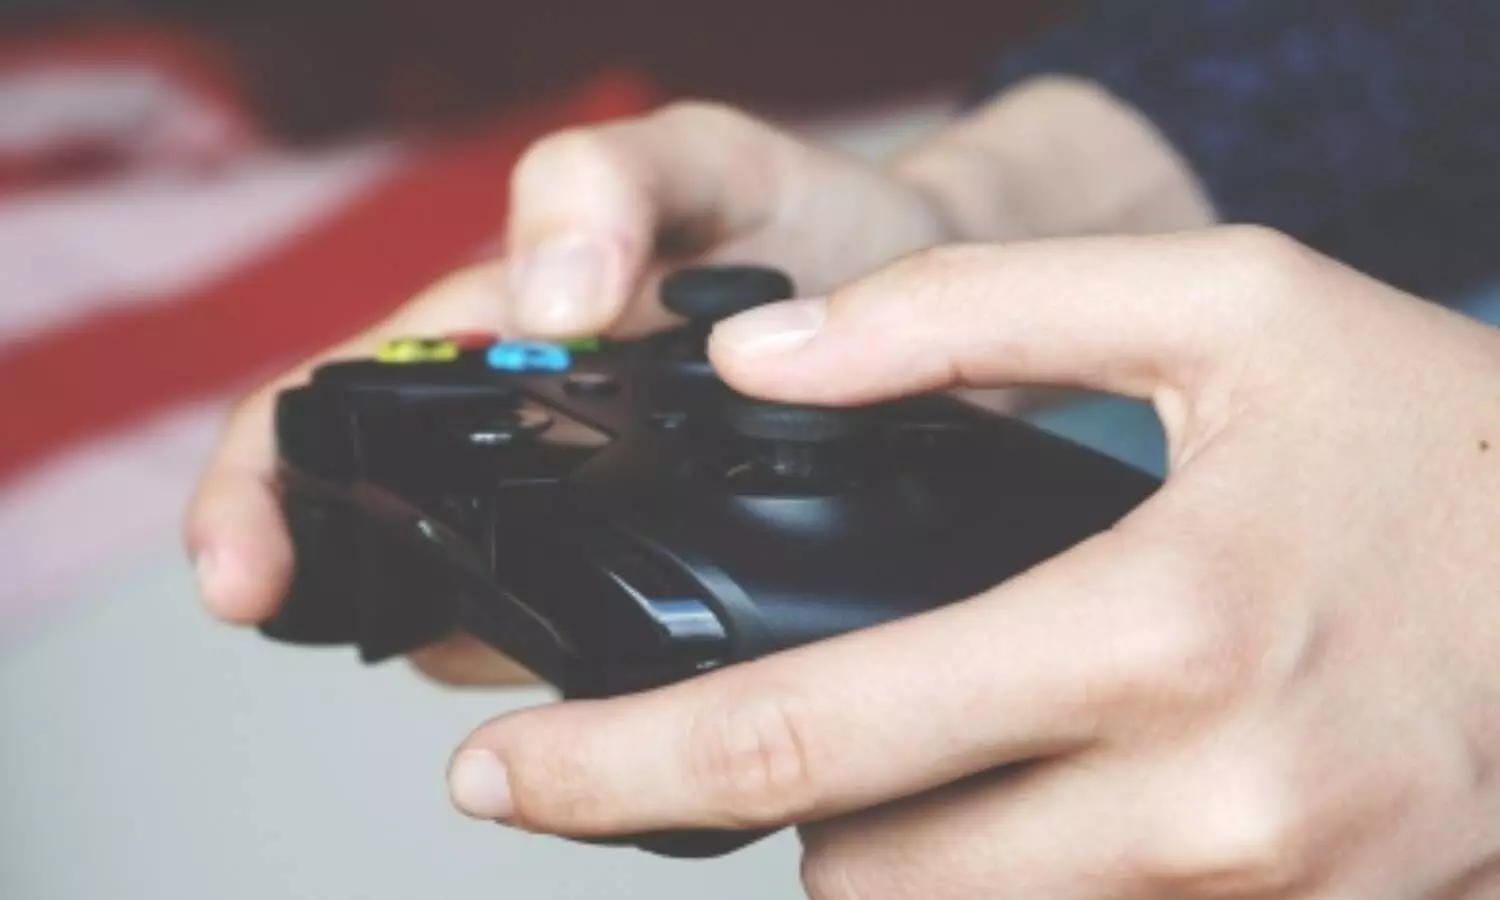 Ktakas proposed bill to ban online gaming will be massive setback for Indian startup eco & gamers